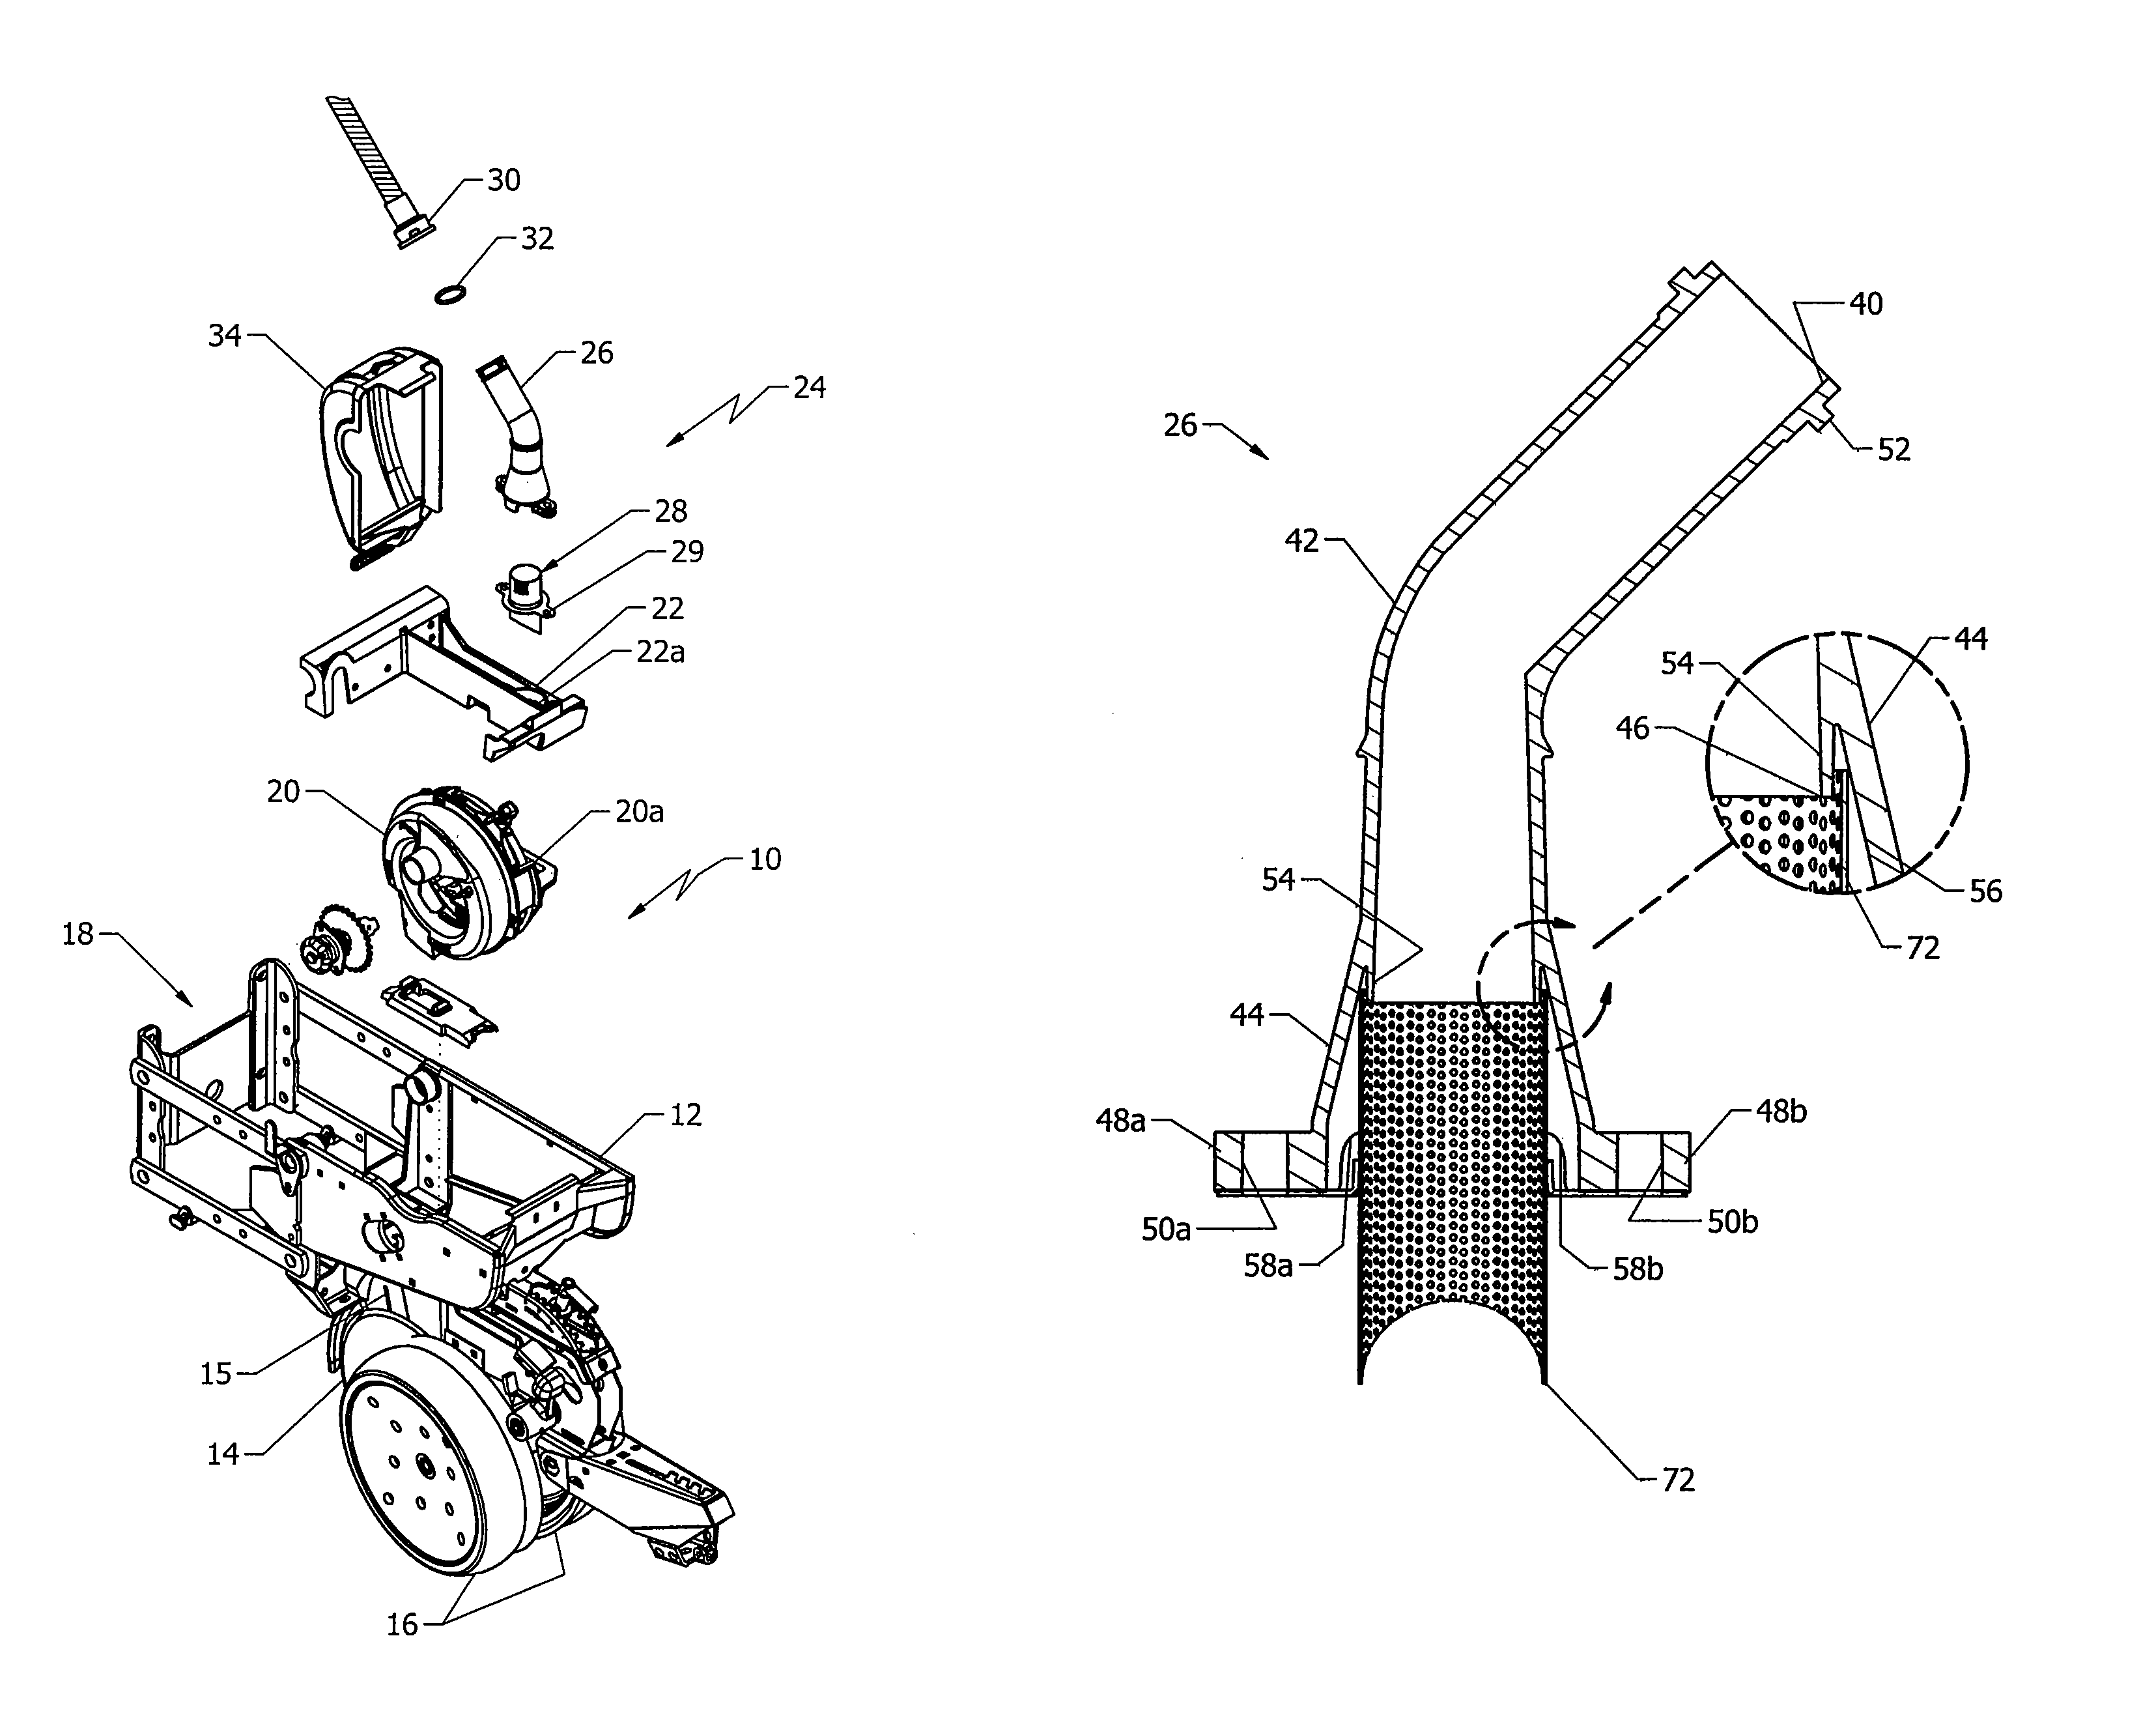 Air pressure dissipator for air seed delivery system